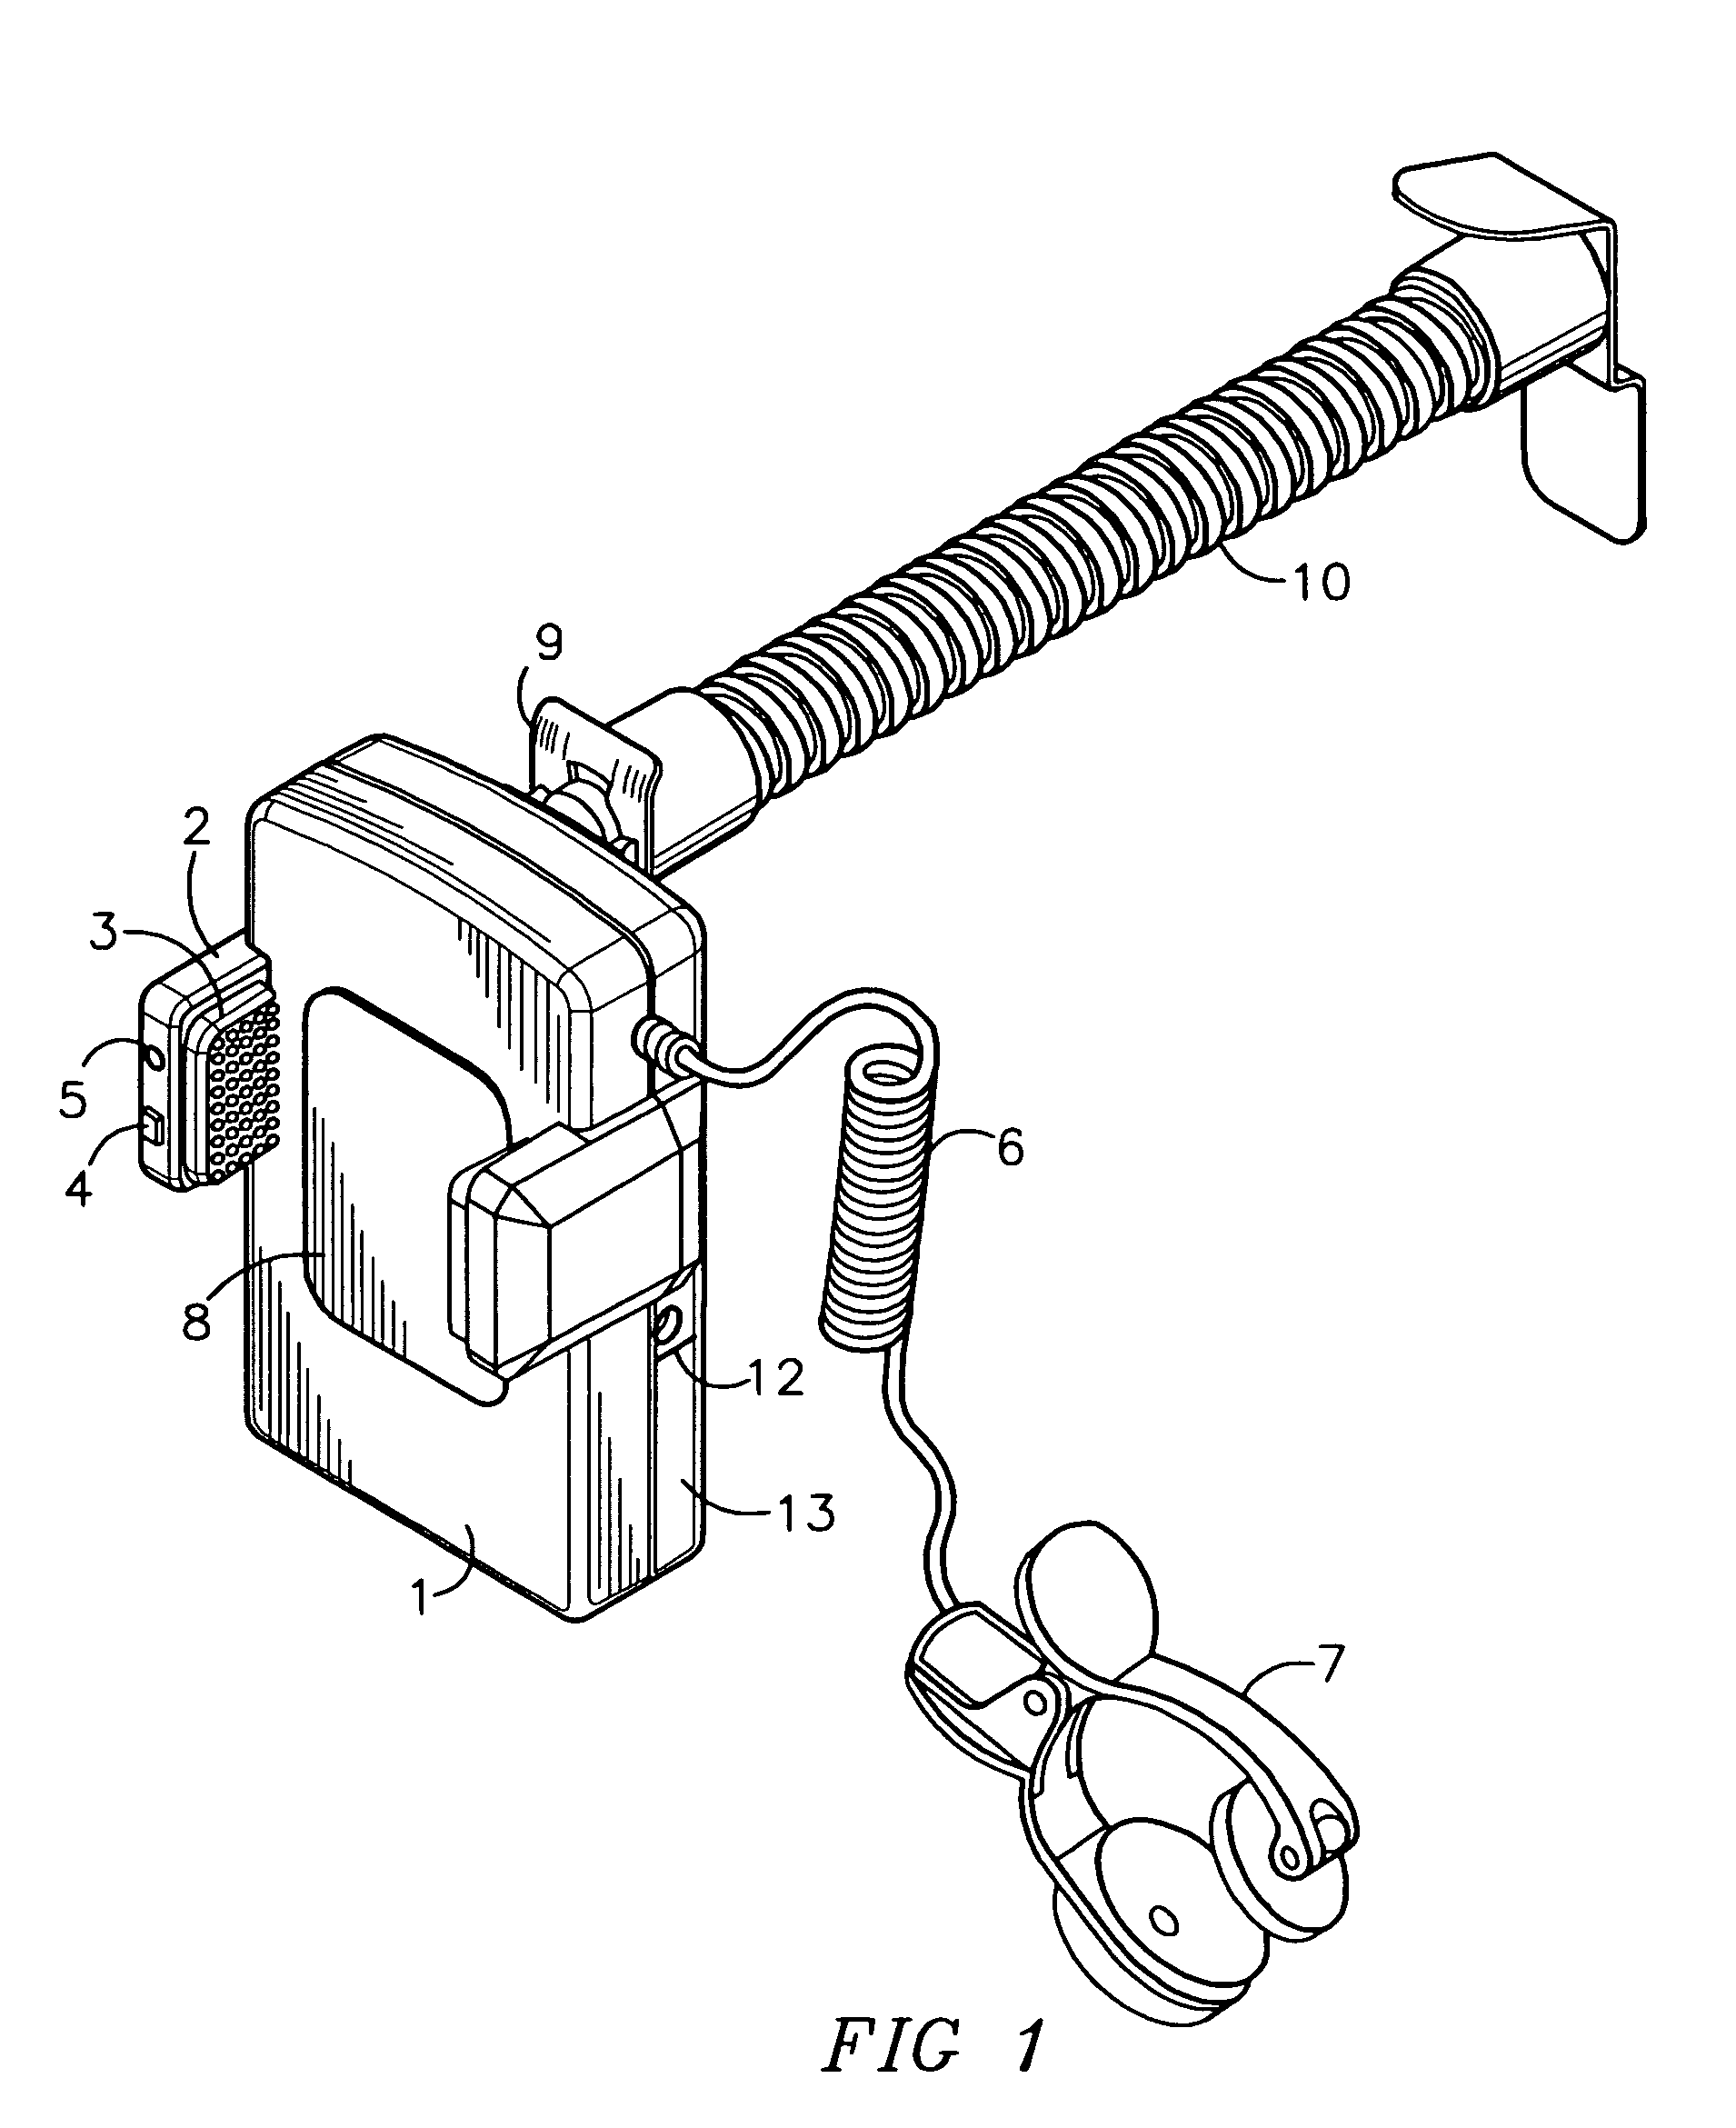 Integrated portable wireless transmitter and method for use